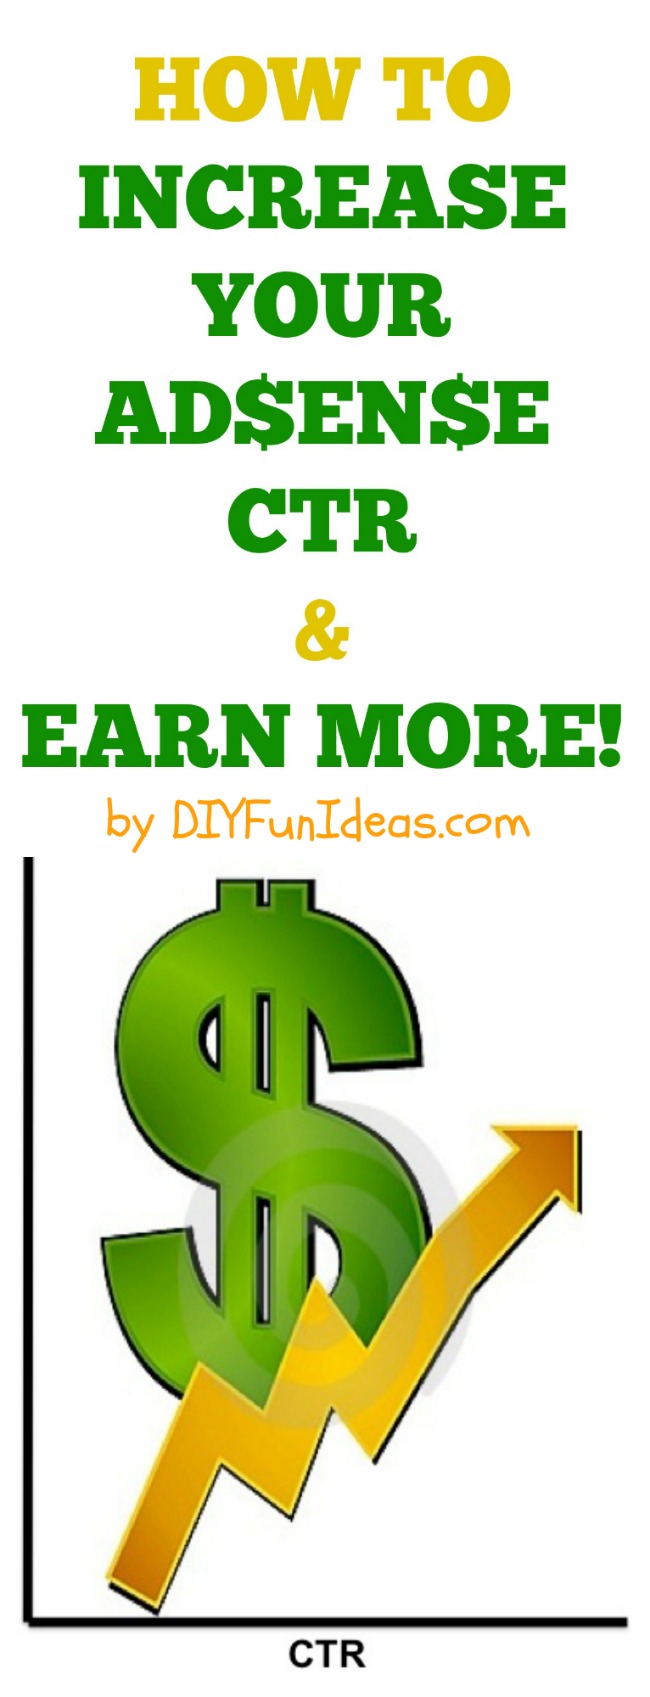 HOW TO INCREASE YOUR ADSENSE CTR AND EARN MORE